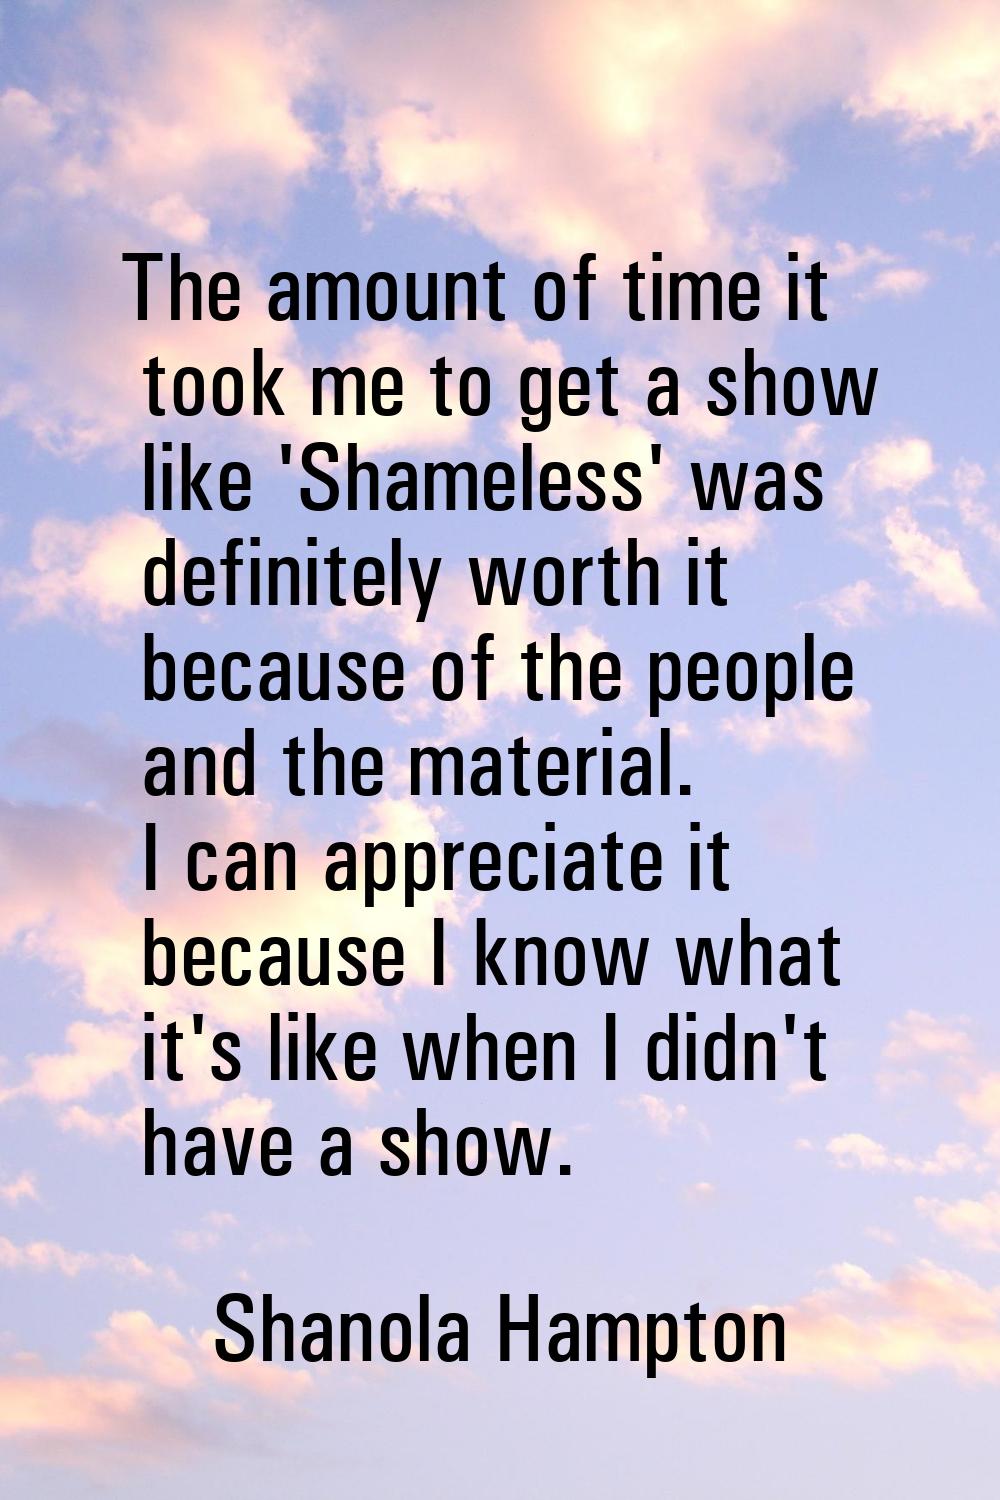 The amount of time it took me to get a show like 'Shameless' was definitely worth it because of the